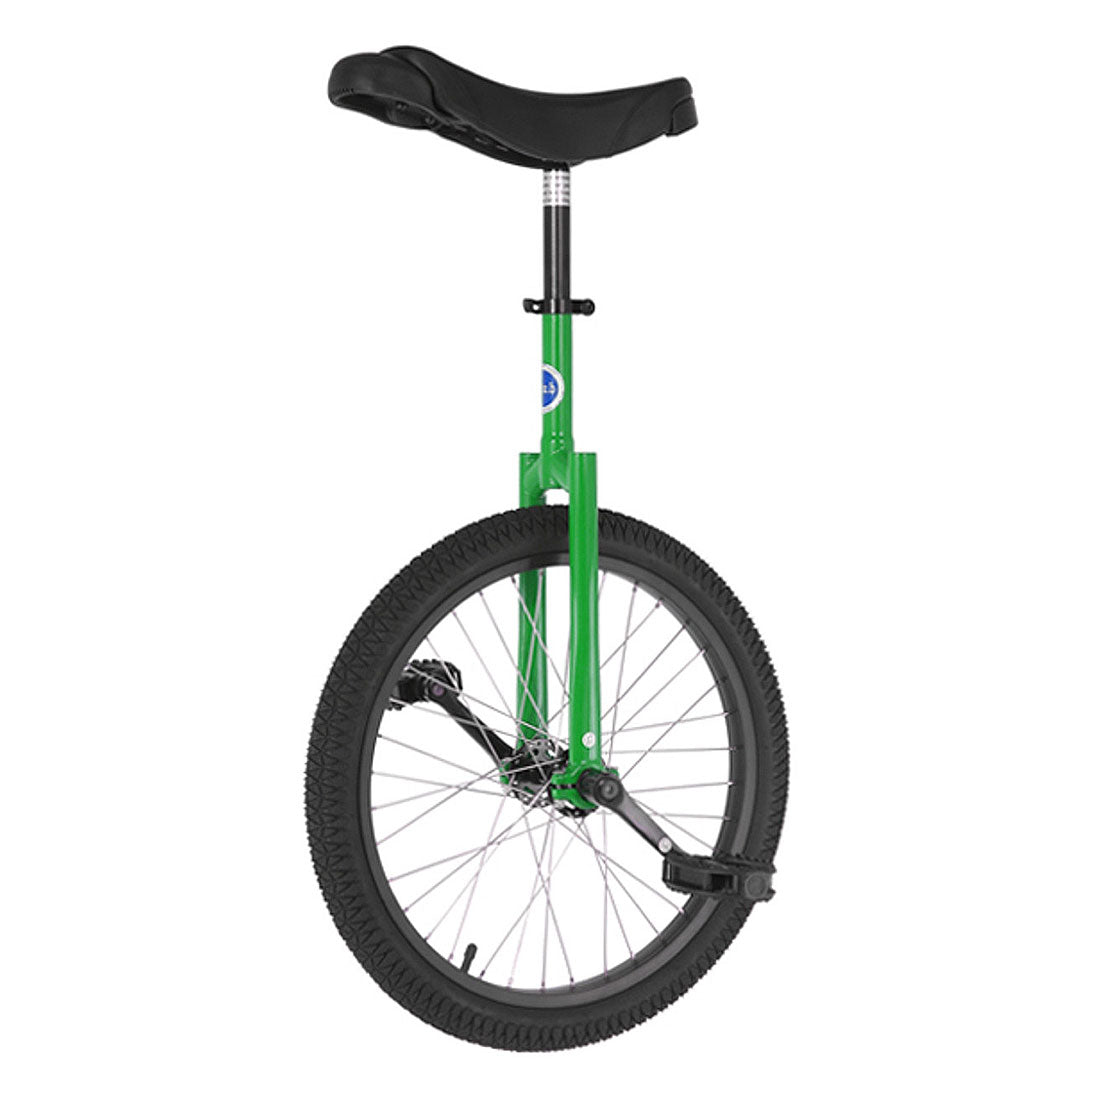 Club Freestyle 20inch Unicycle - Green/Black Other Fun Toys